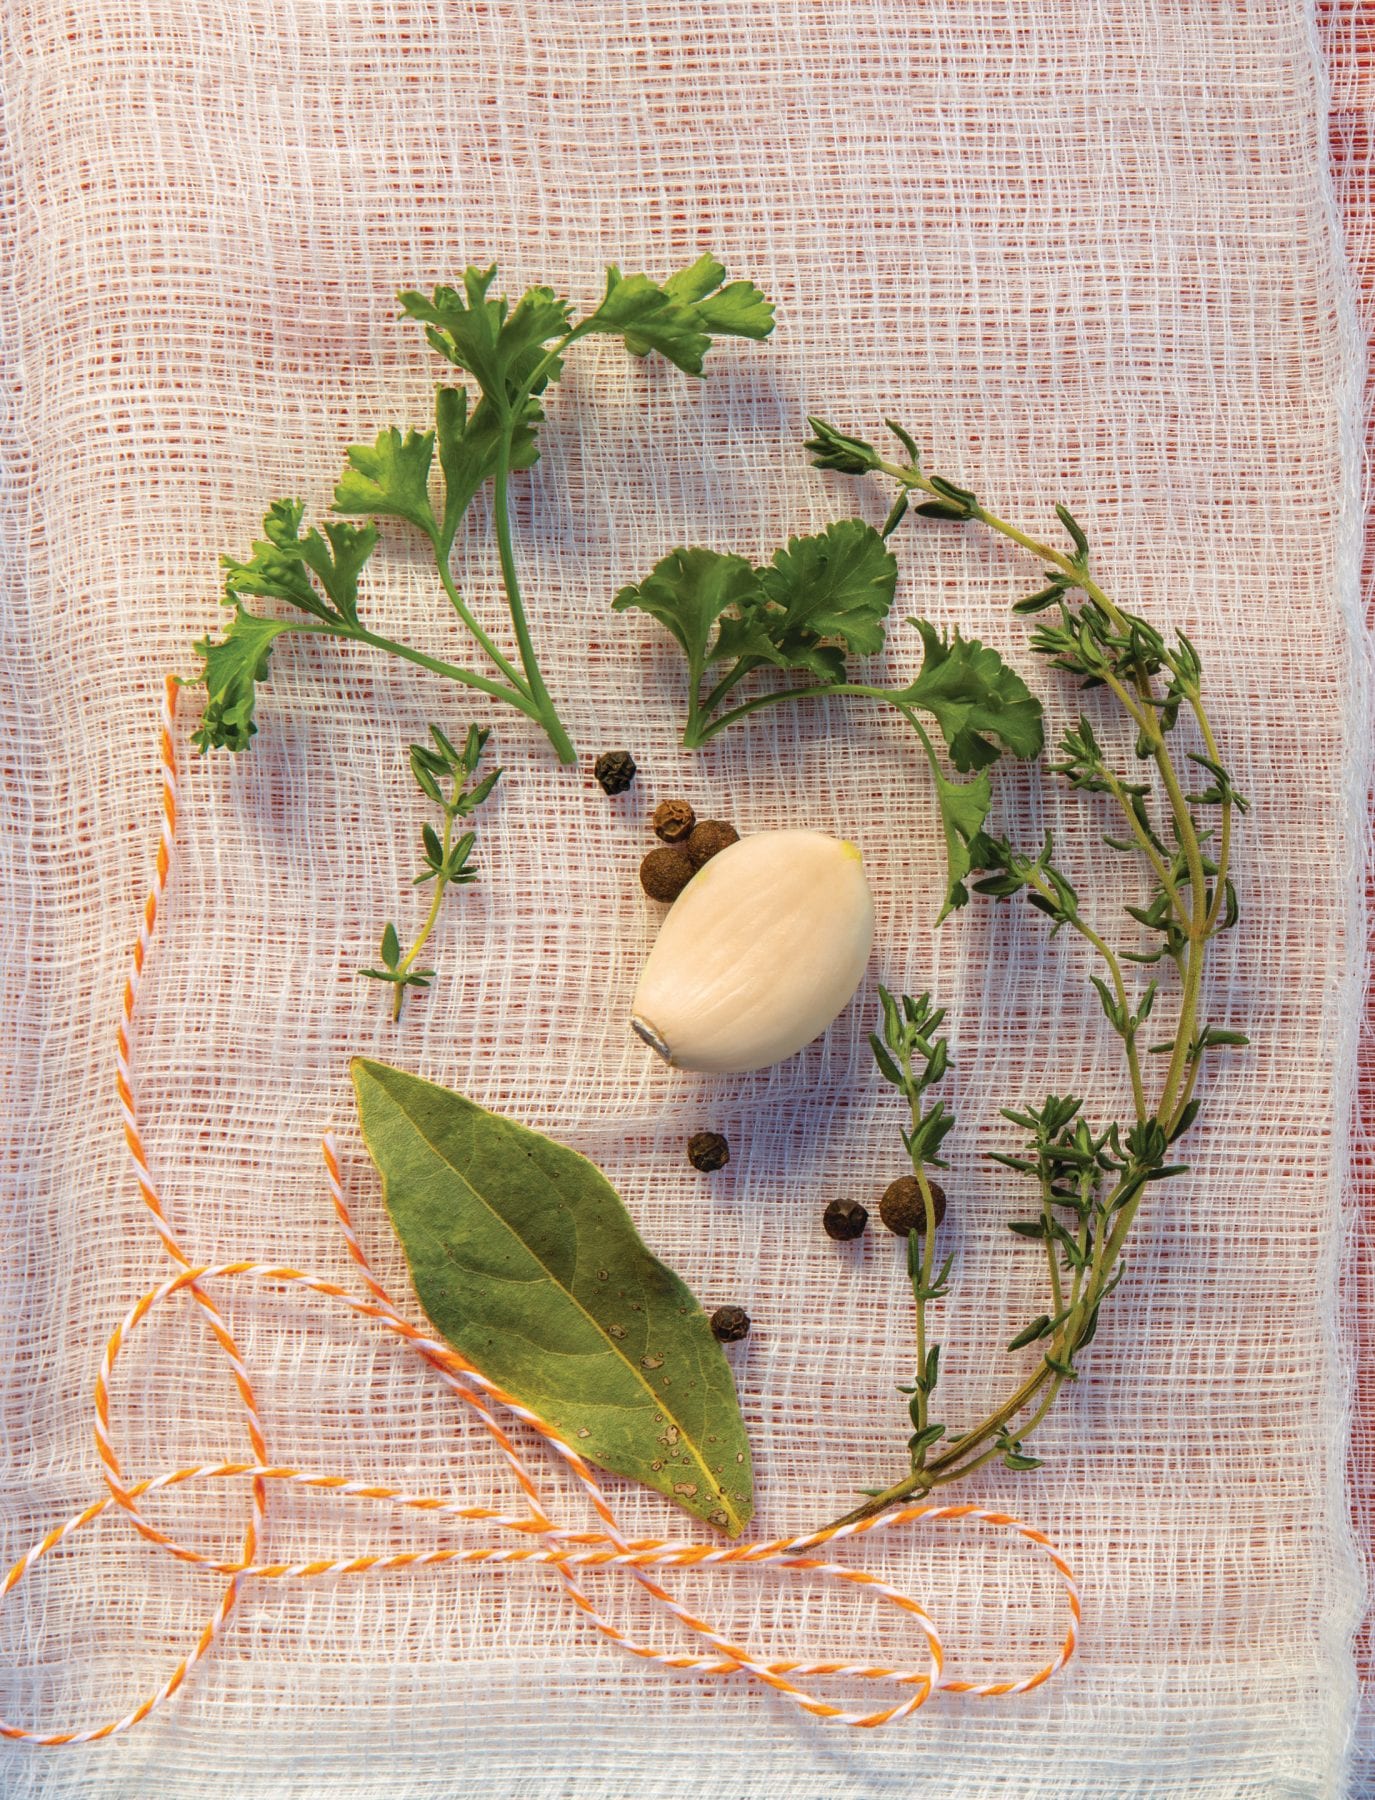 How to Make and Use Bouquet Garni